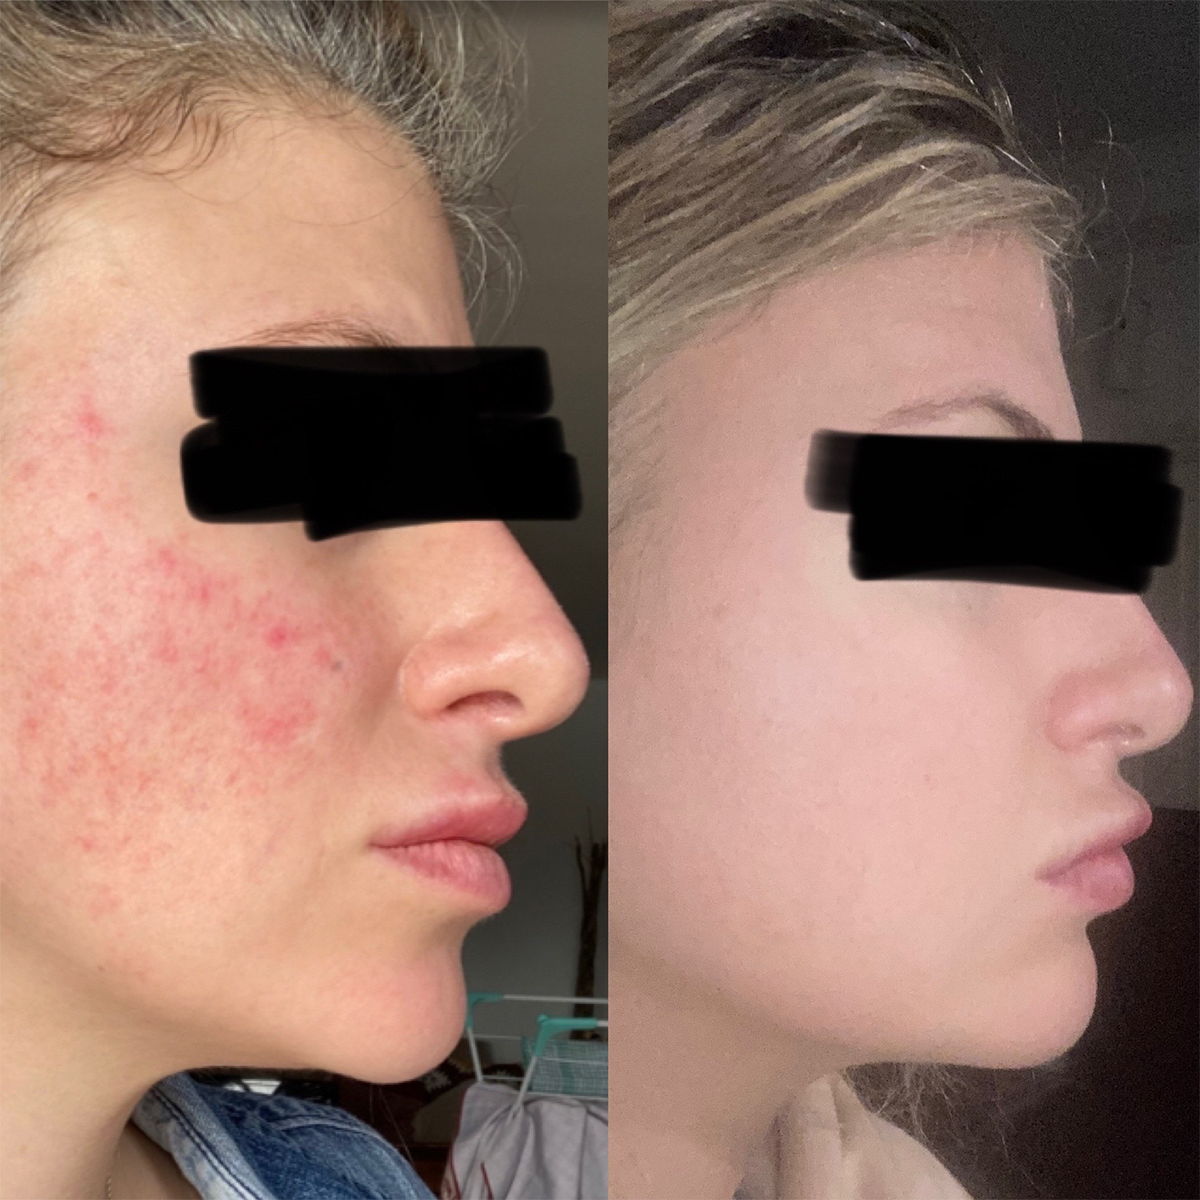 Can Rosacea be helped naturally